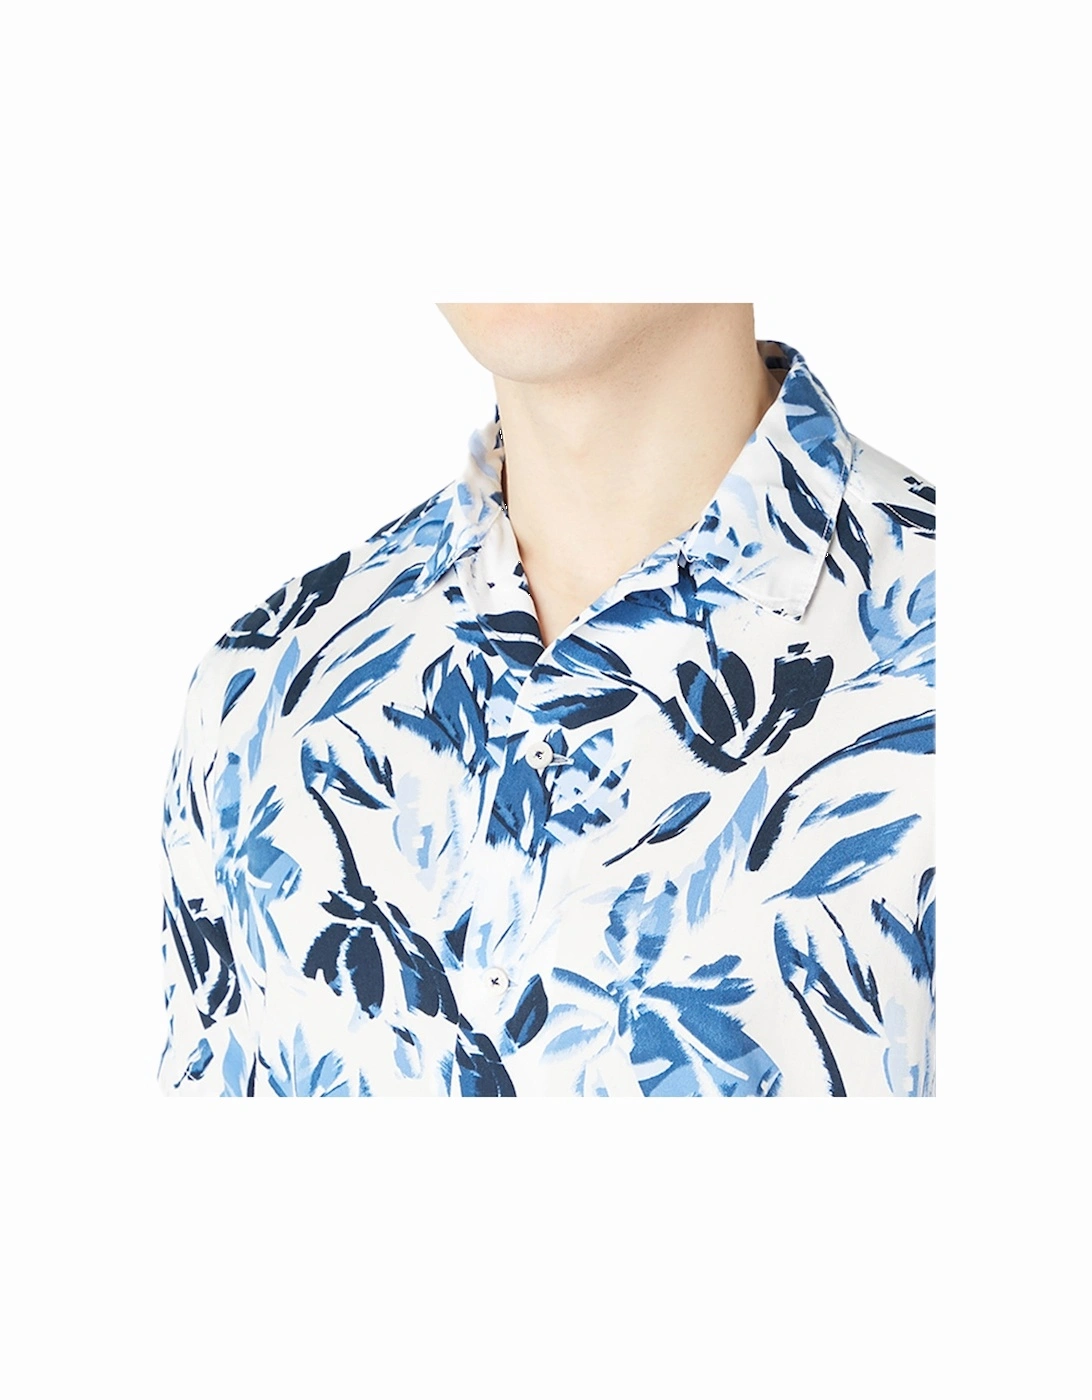 Mens Paolo Leaf Print Pattern S/S Shirt (White/Navy)